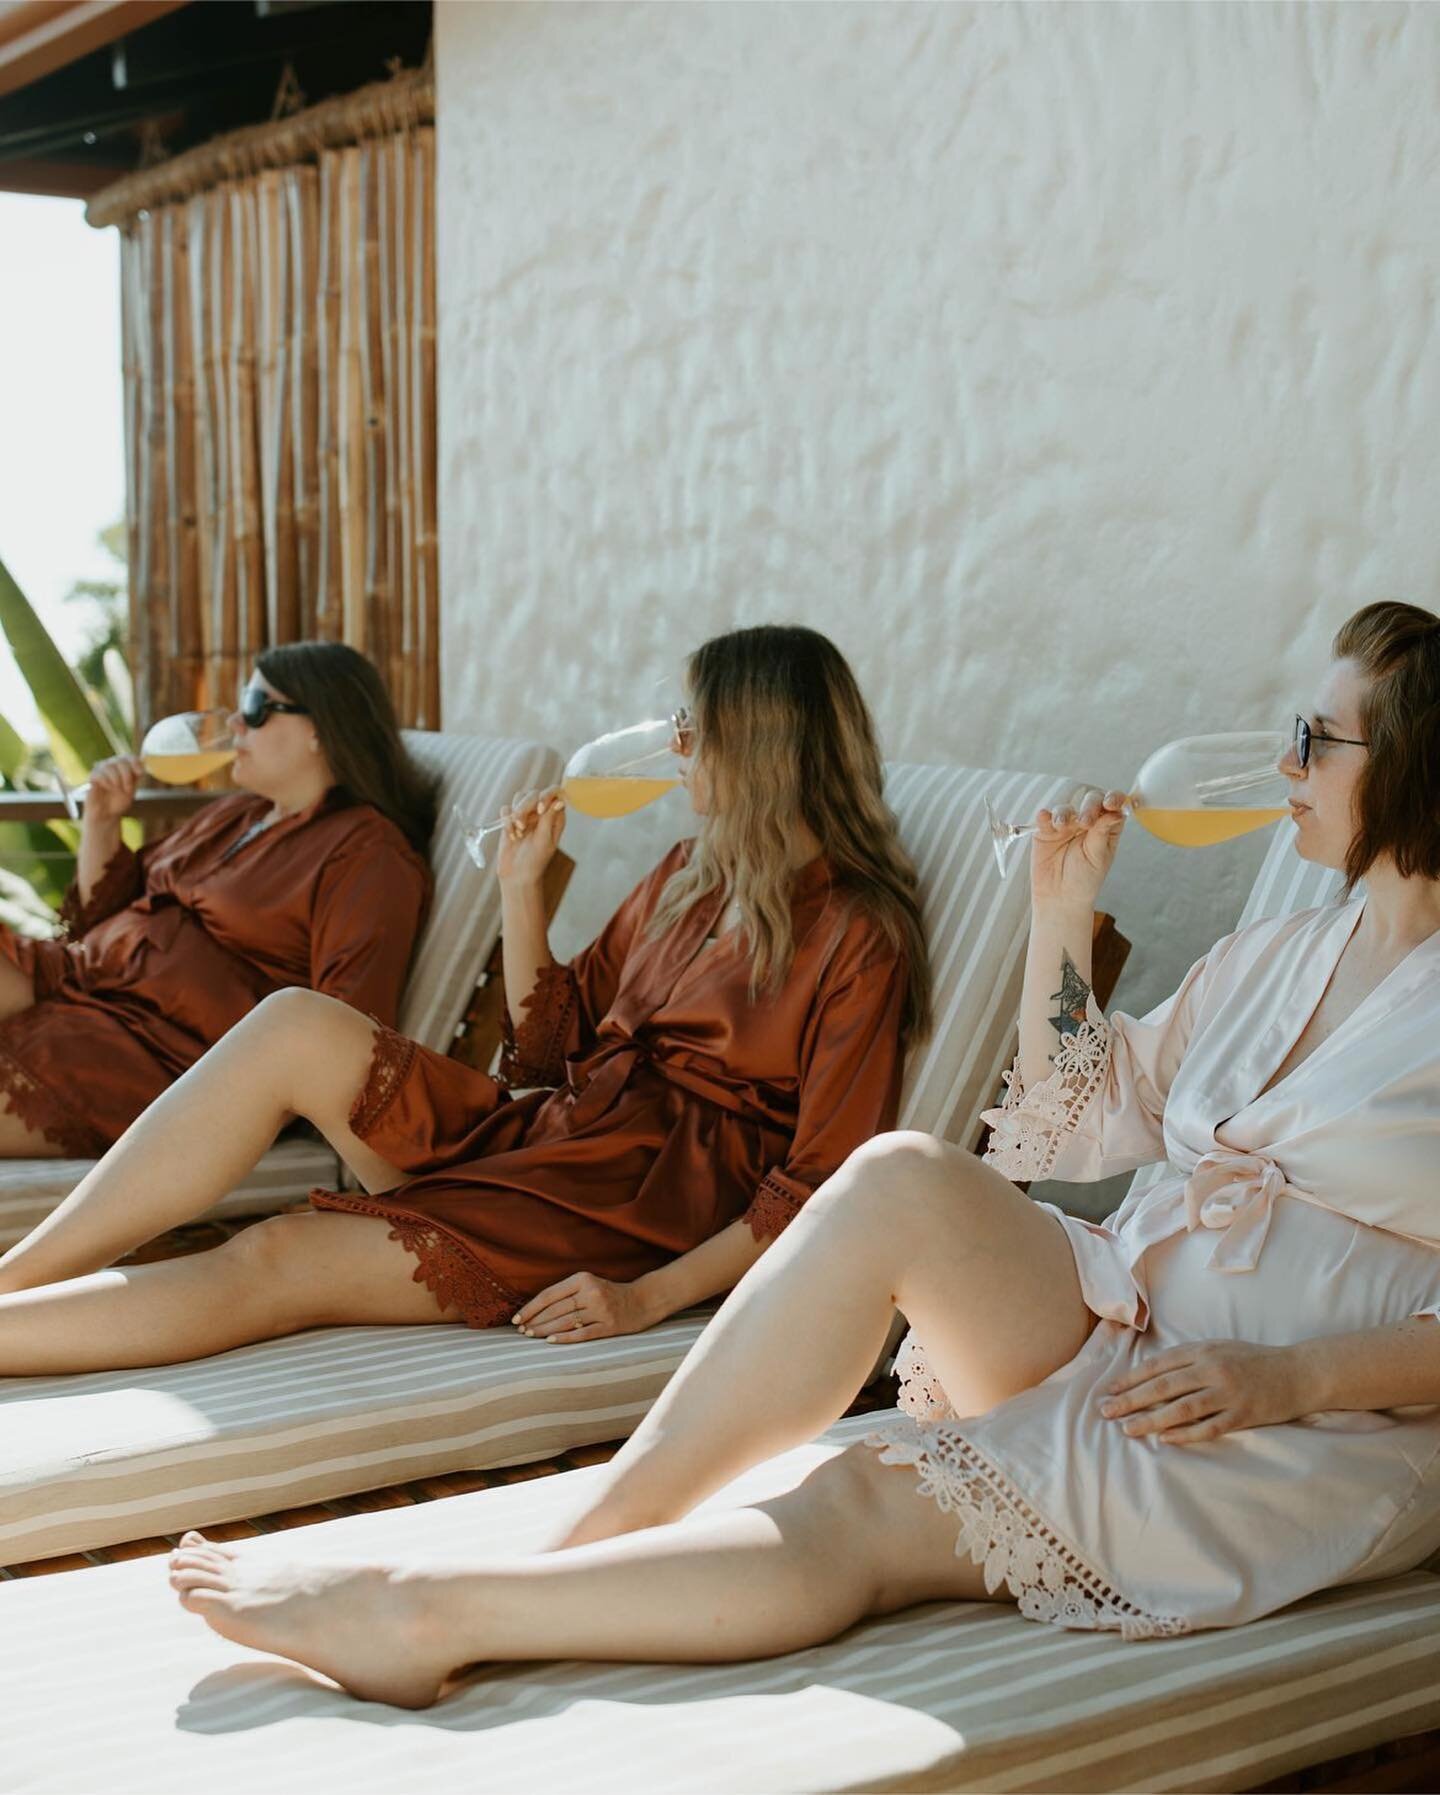 Who says weddings have to be stressful? .
&bull;
The bride and her bridesmaids enjoying cocktails poolside before the ceremony .
&bull;
&bull; 
&bull;
#casamarbellahotel #boutiquehillsideretreat #monday #destinationwedding #privatevilla #wedding #pur